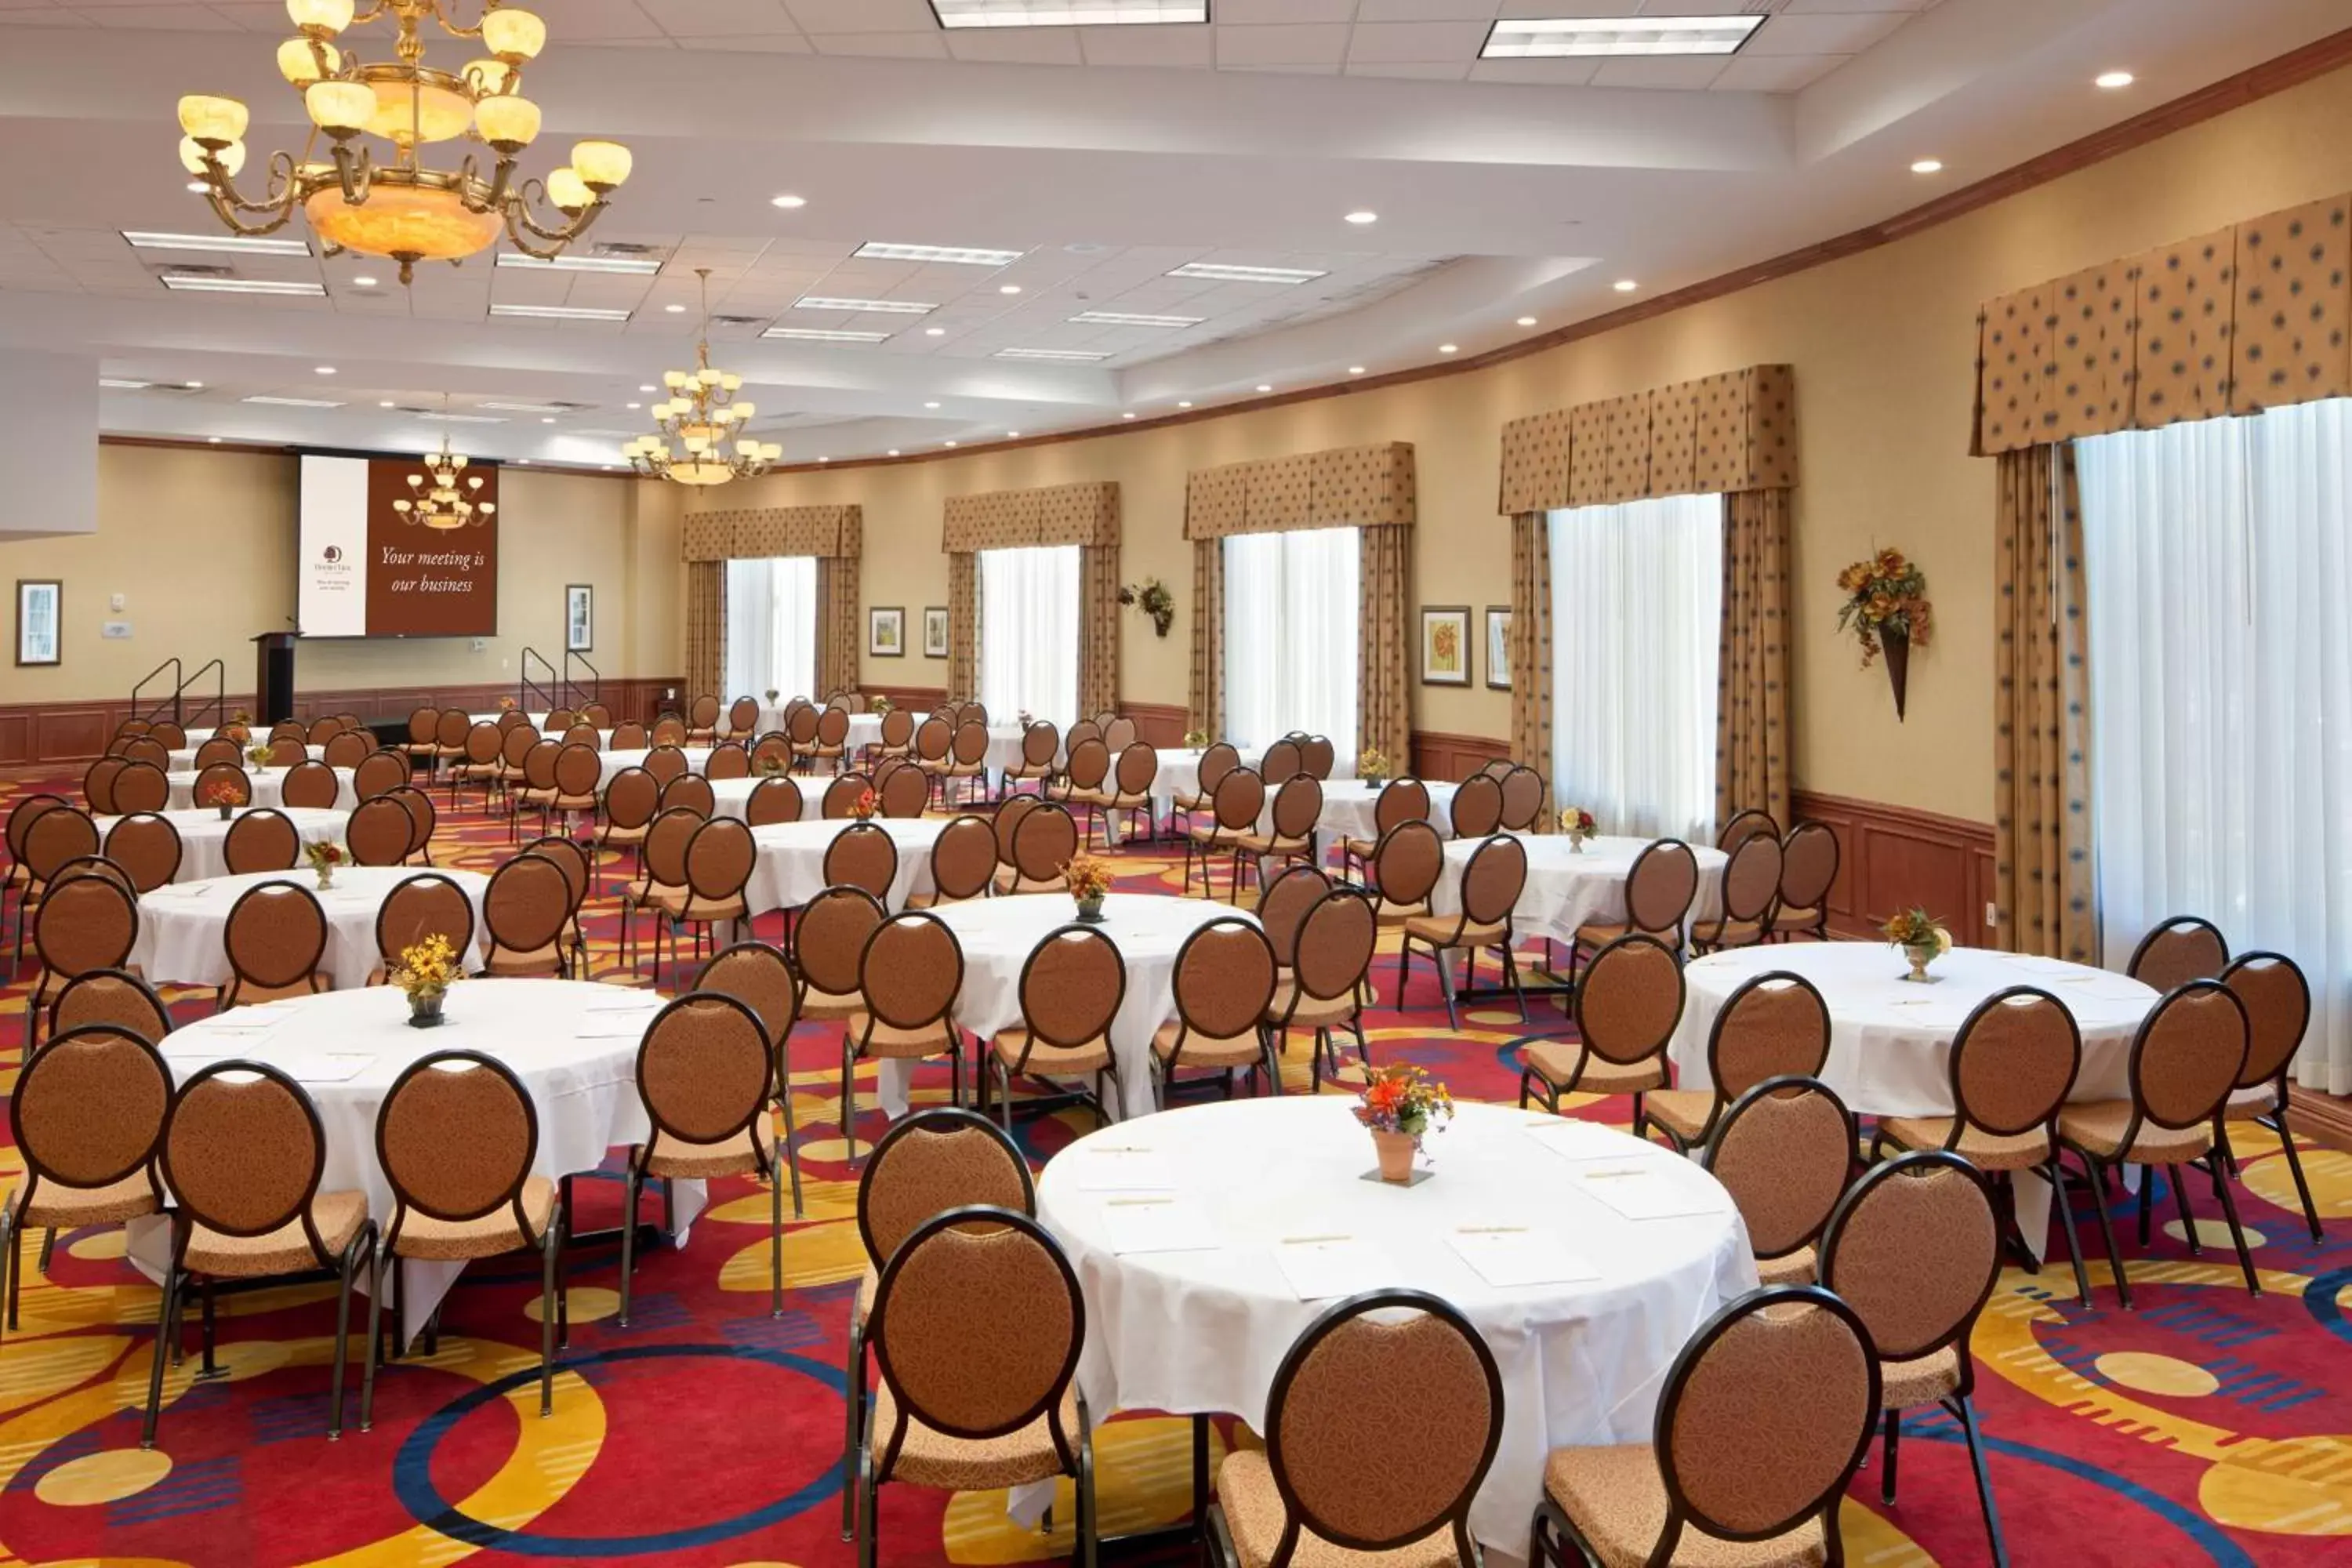 Meeting/conference room, Banquet Facilities in DoubleTree by Hilton Jefferson City